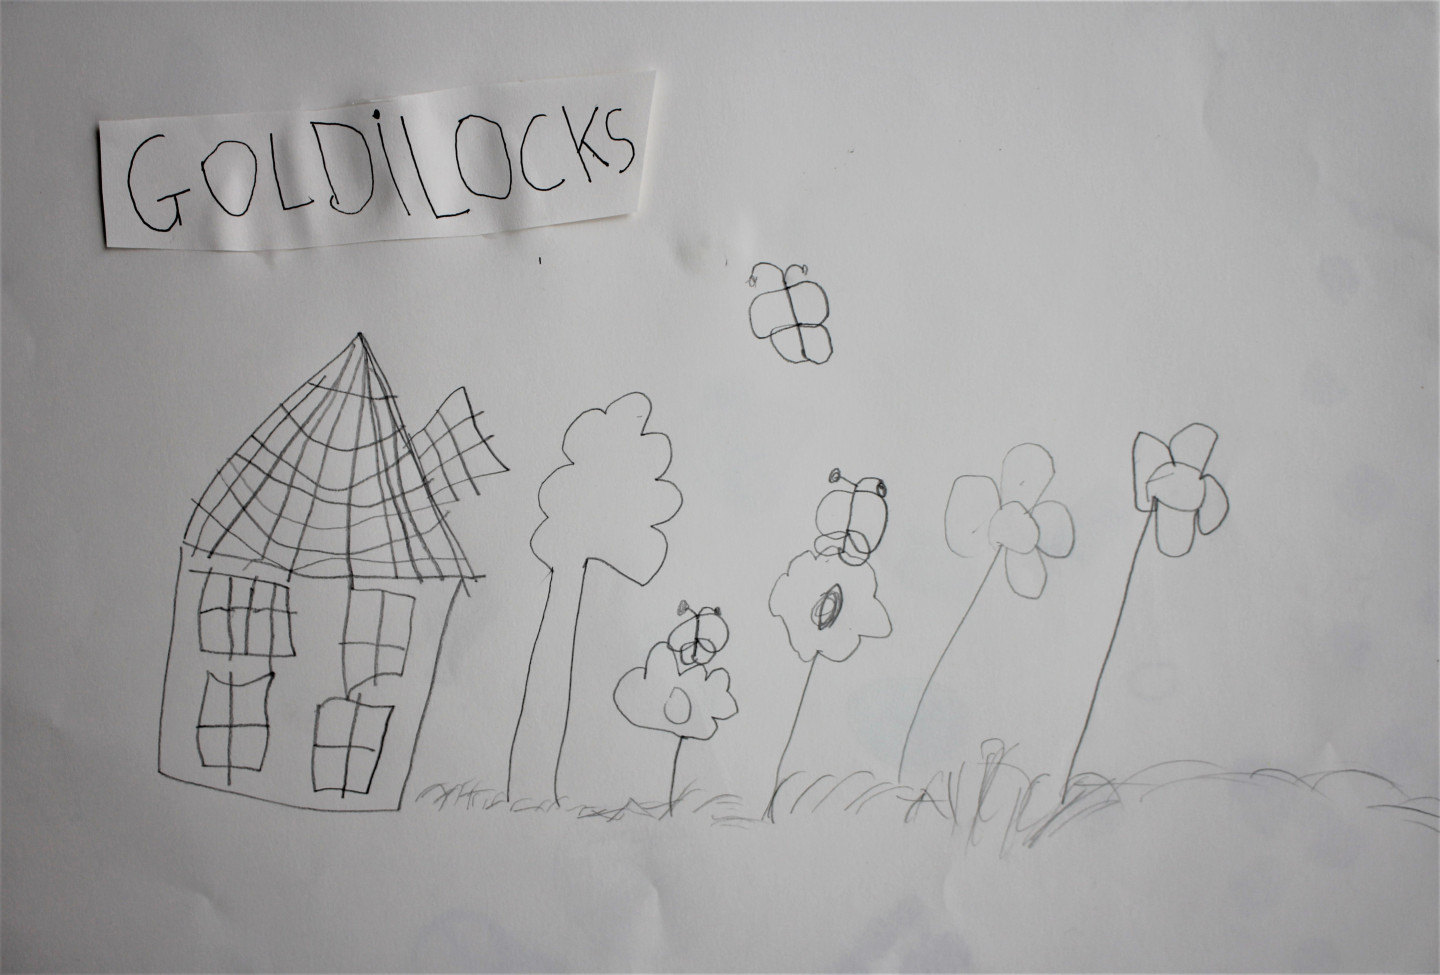 ANNA, AGE 5. I have made a beautiful big garden for Goldilocks, next to her house, so she doesn’t need to go into the woods to pick flowers again. There’s a big tree and lots of tall flowers and butterflies (to help grow more flowers) I think she’d be very happy there.